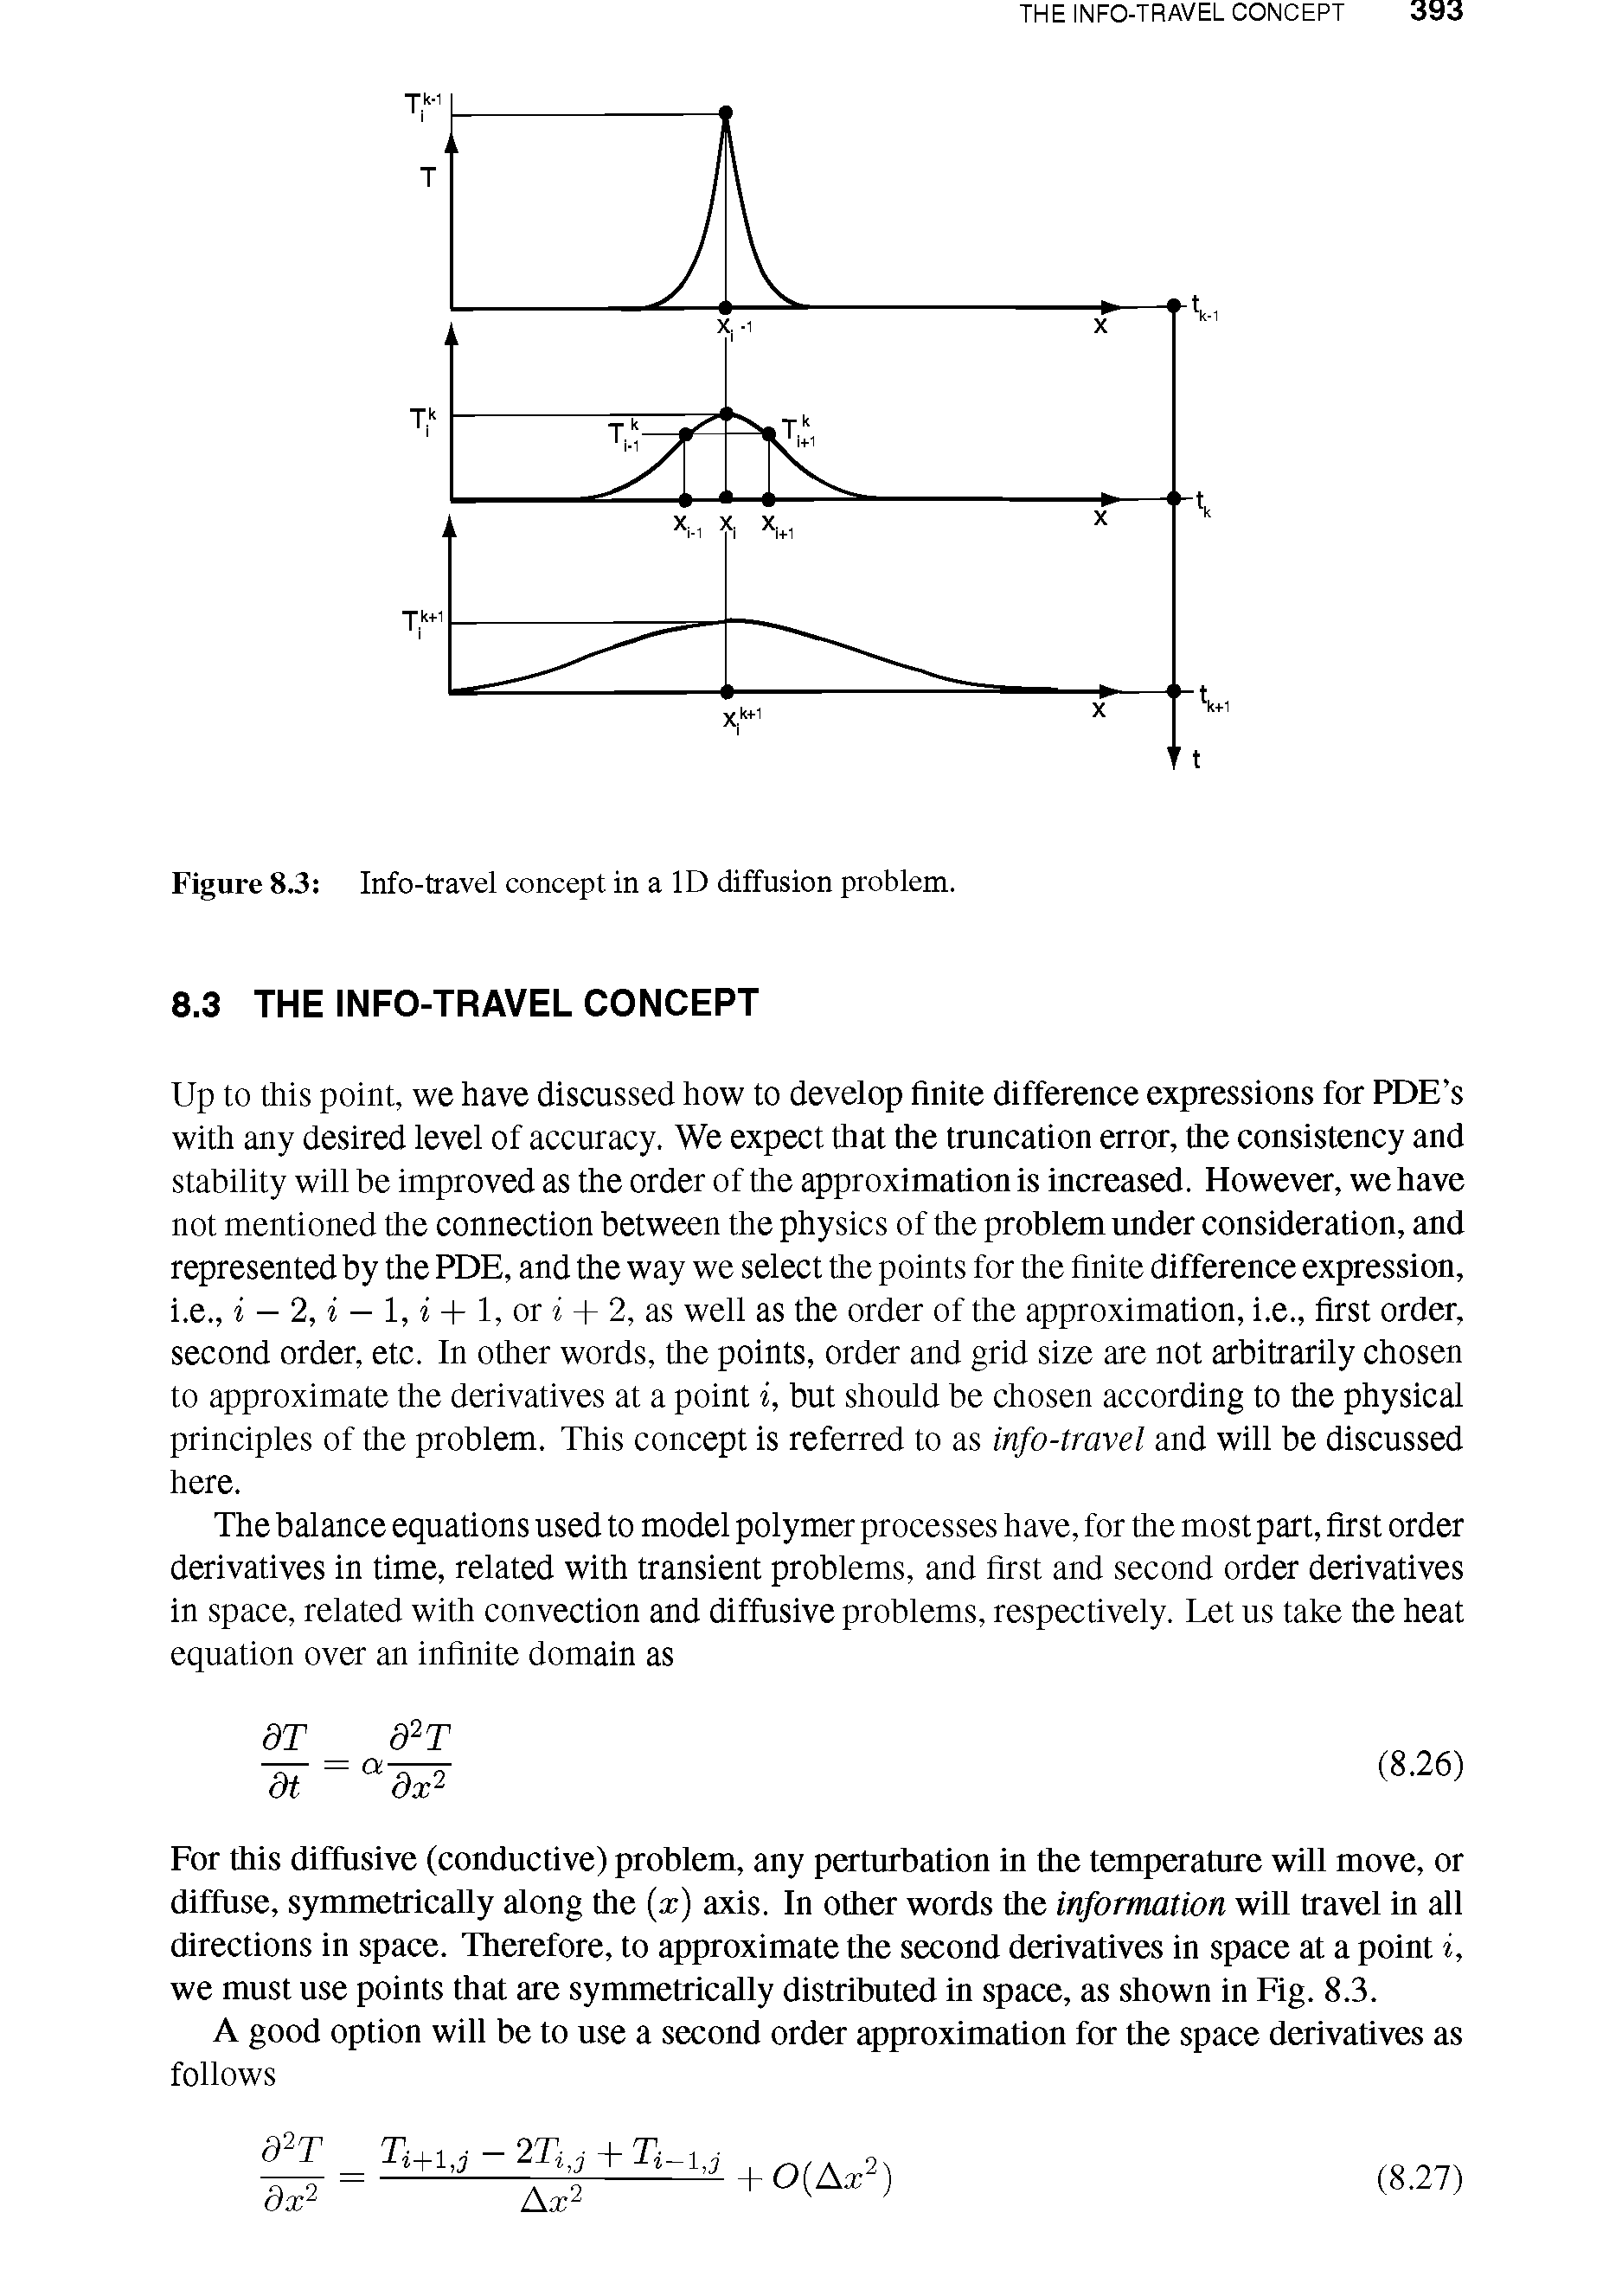 Figure 8.3 Info-travel concept in a ID diffusion problem.